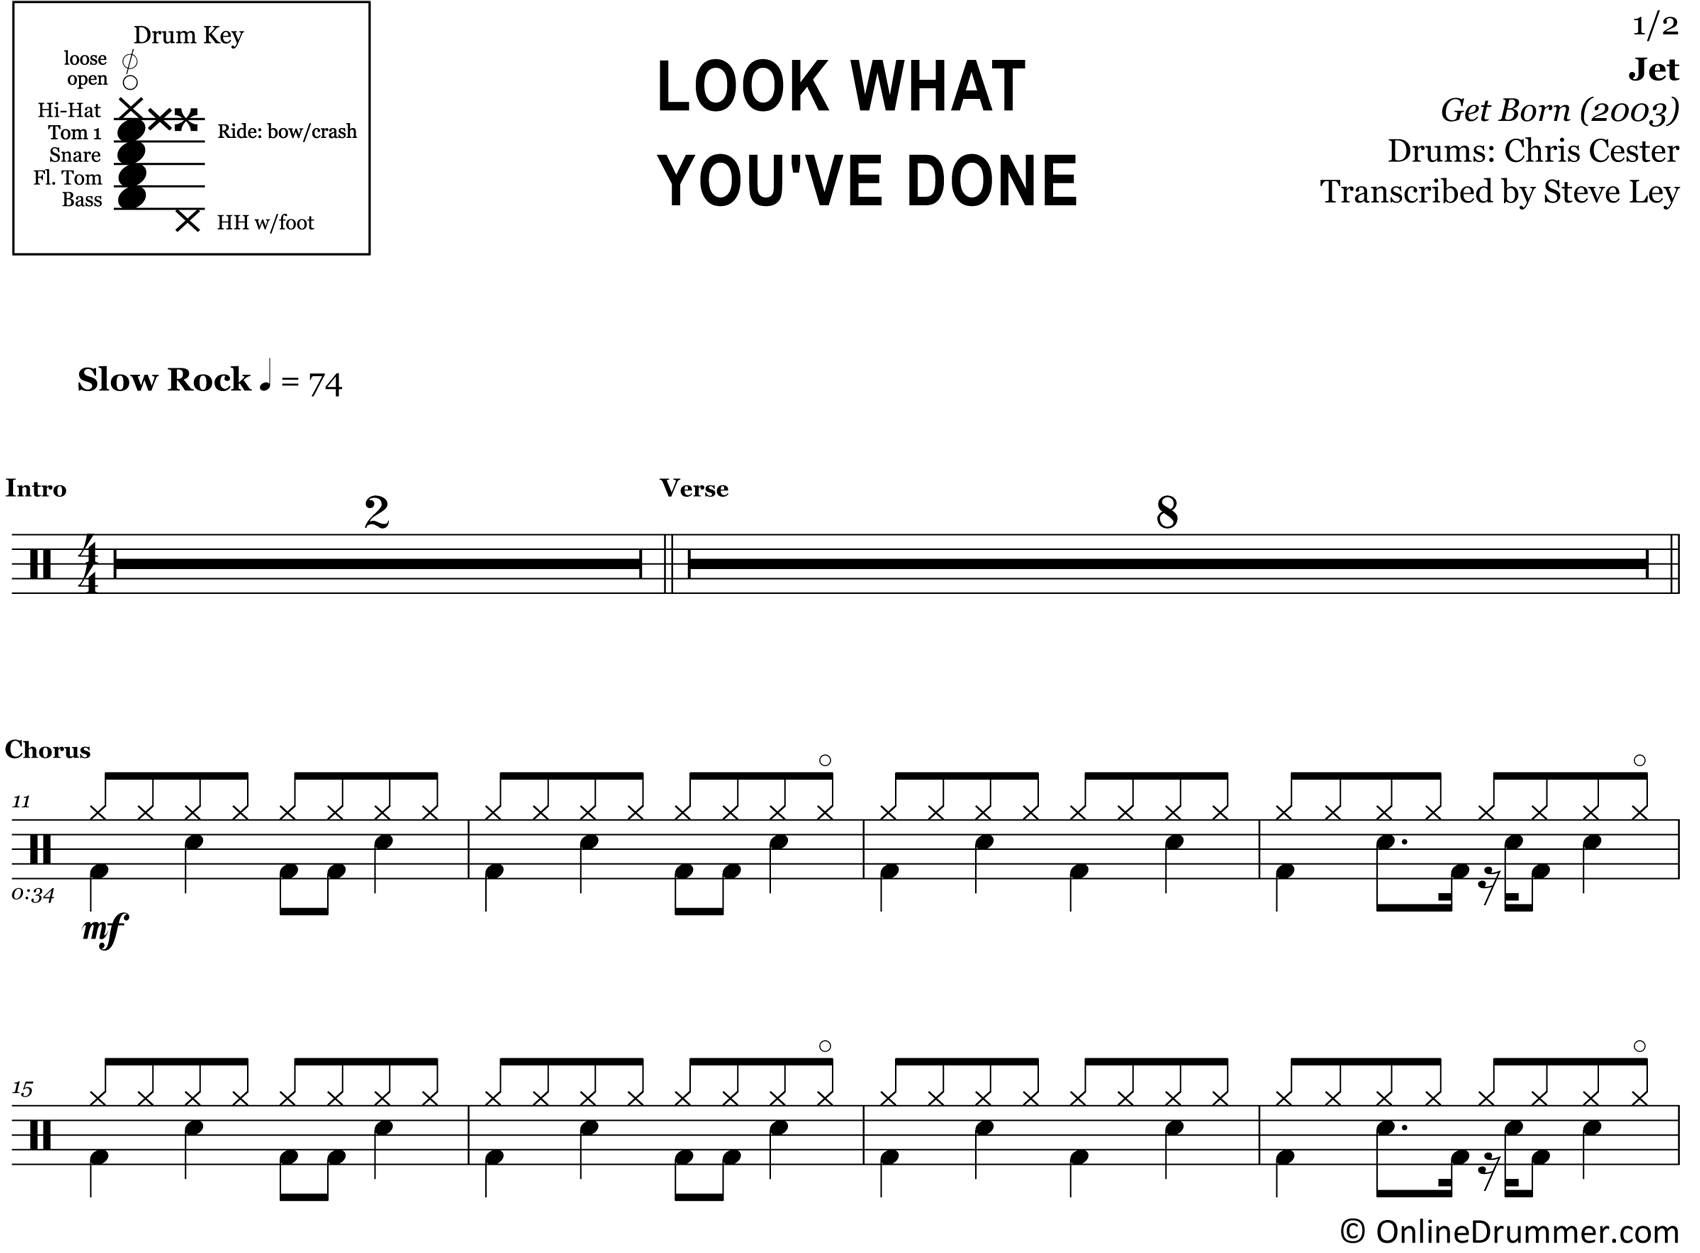 Look What You've Done - Jet - Drum Sheet Music